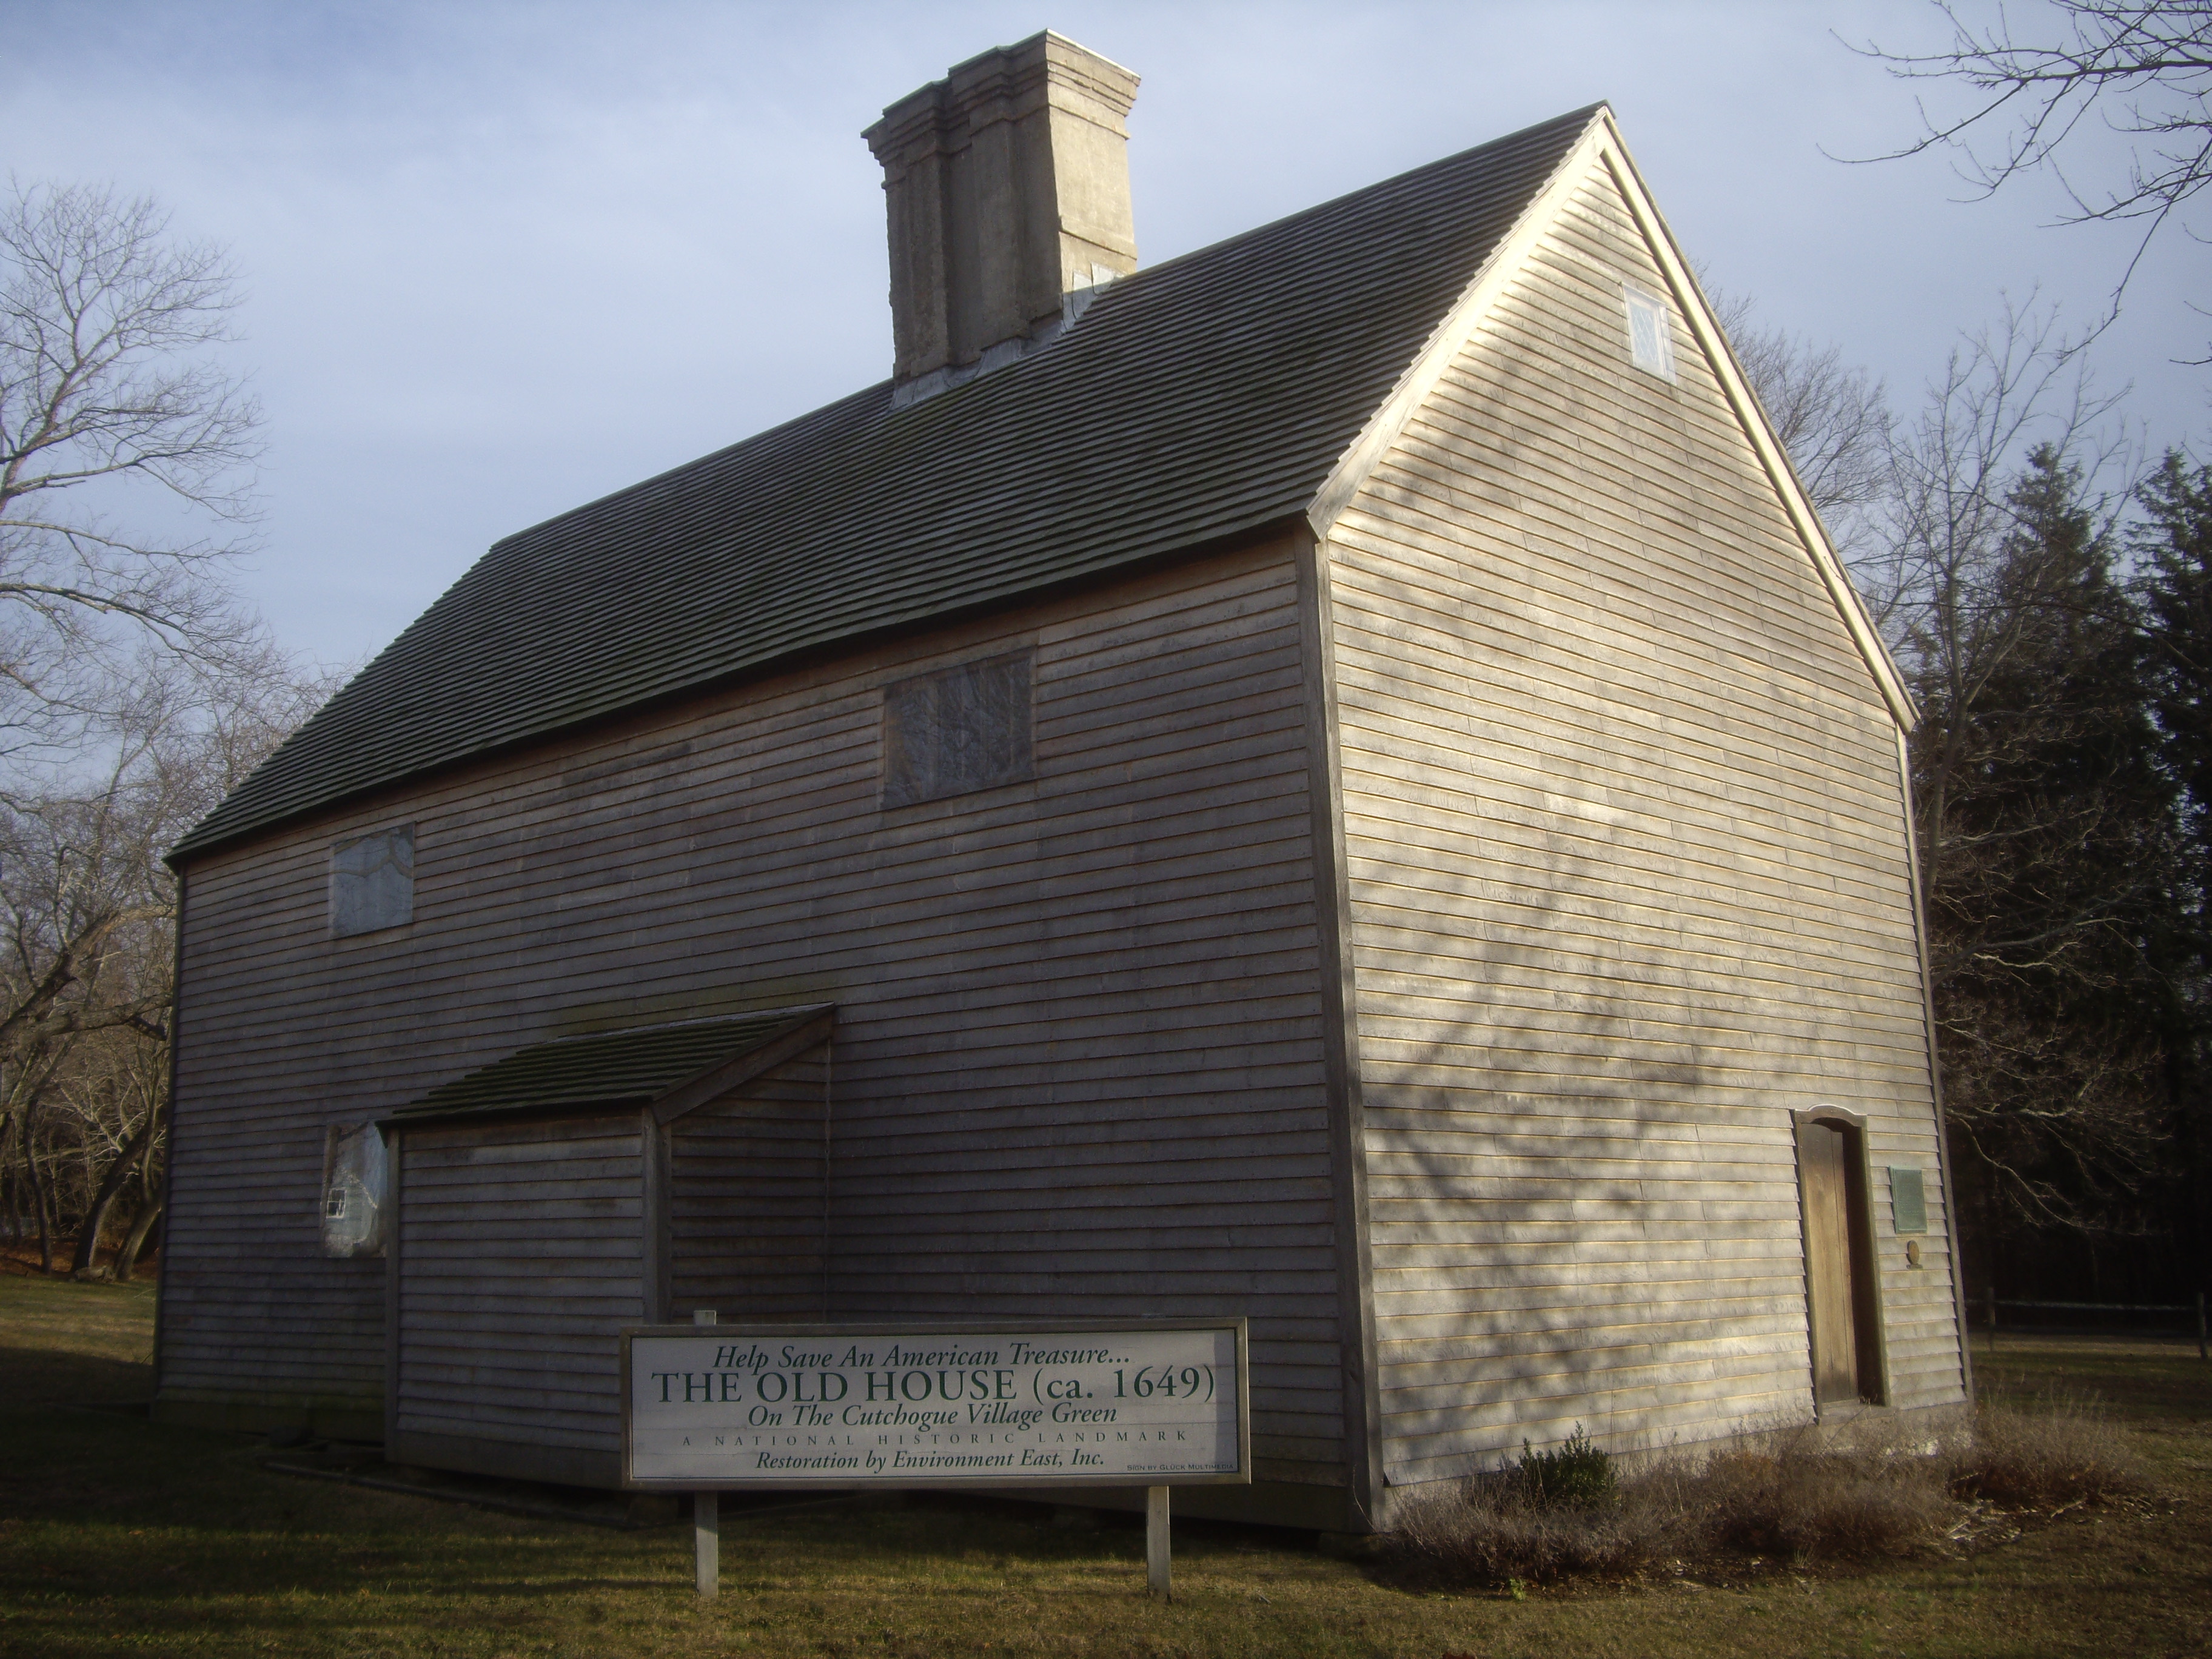 File:The-old-house-cutchogue.jpg - Wikimedia Commons